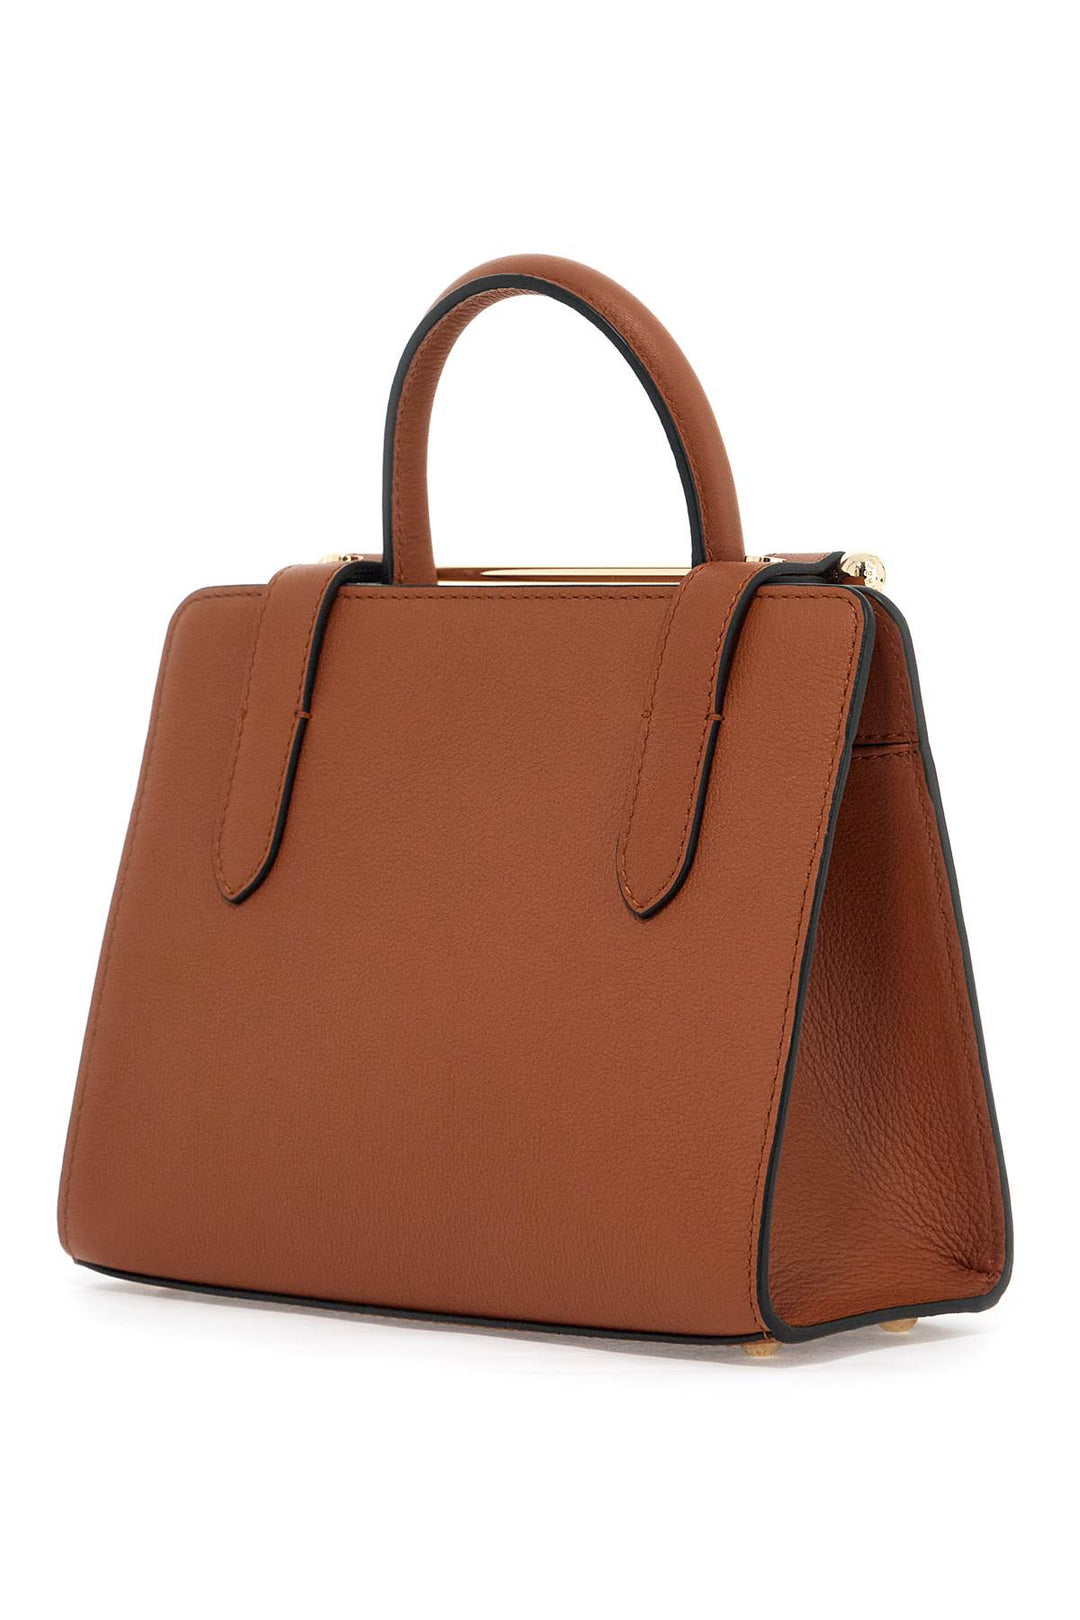 Strathberry Mini Tote Bag   Brown